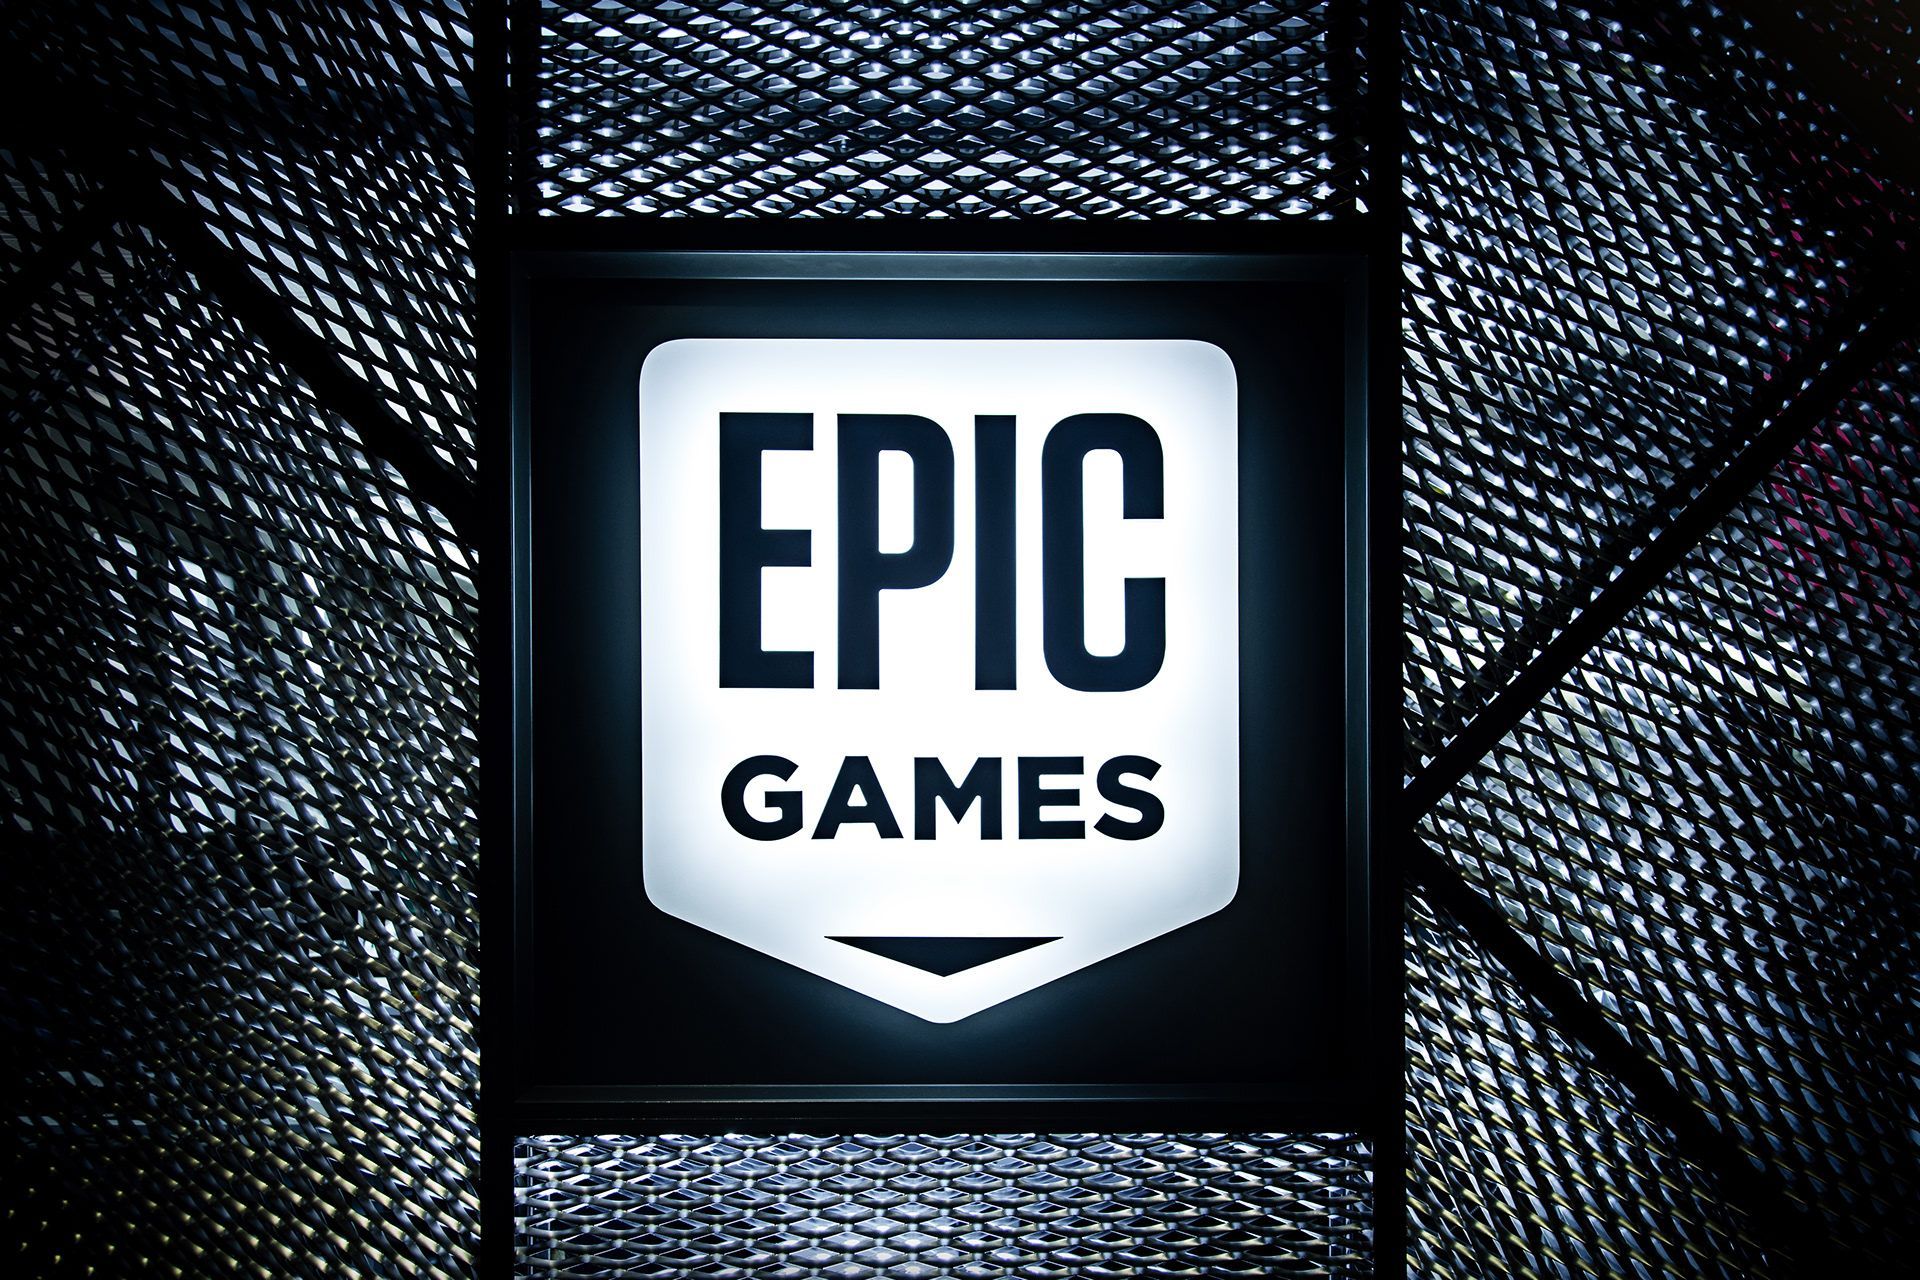 Сайт epic games. Epic games. Epica game. Epic gays. Картинка Epic games.